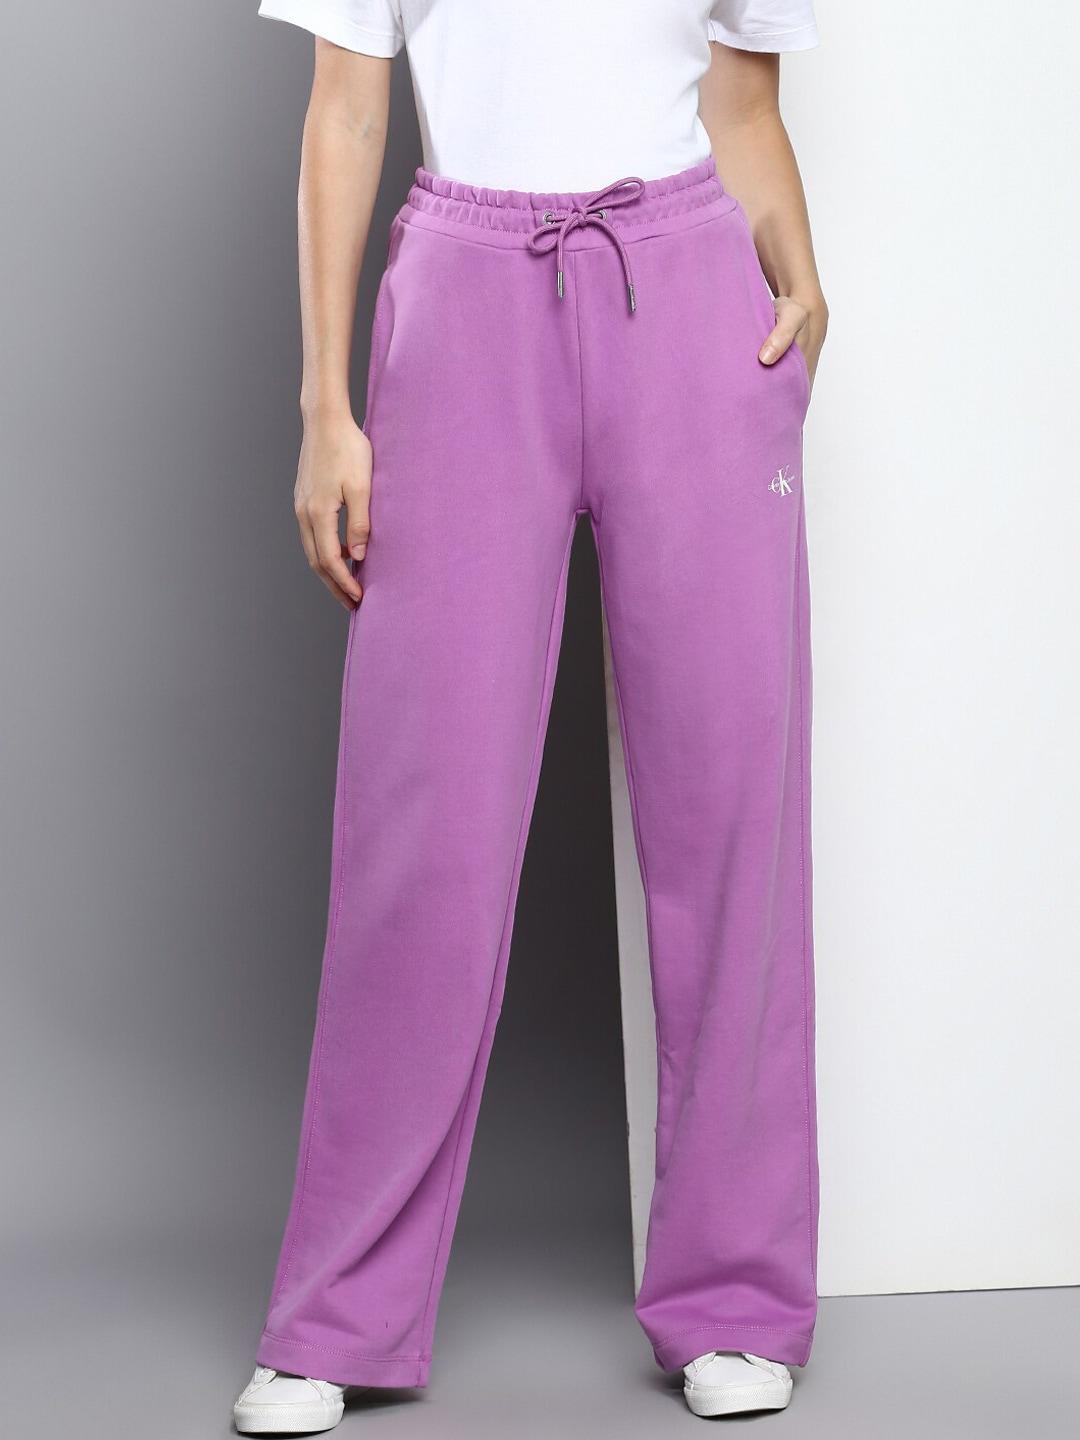 calvin-klein-jeans-women-relaxed-fit-track-pants